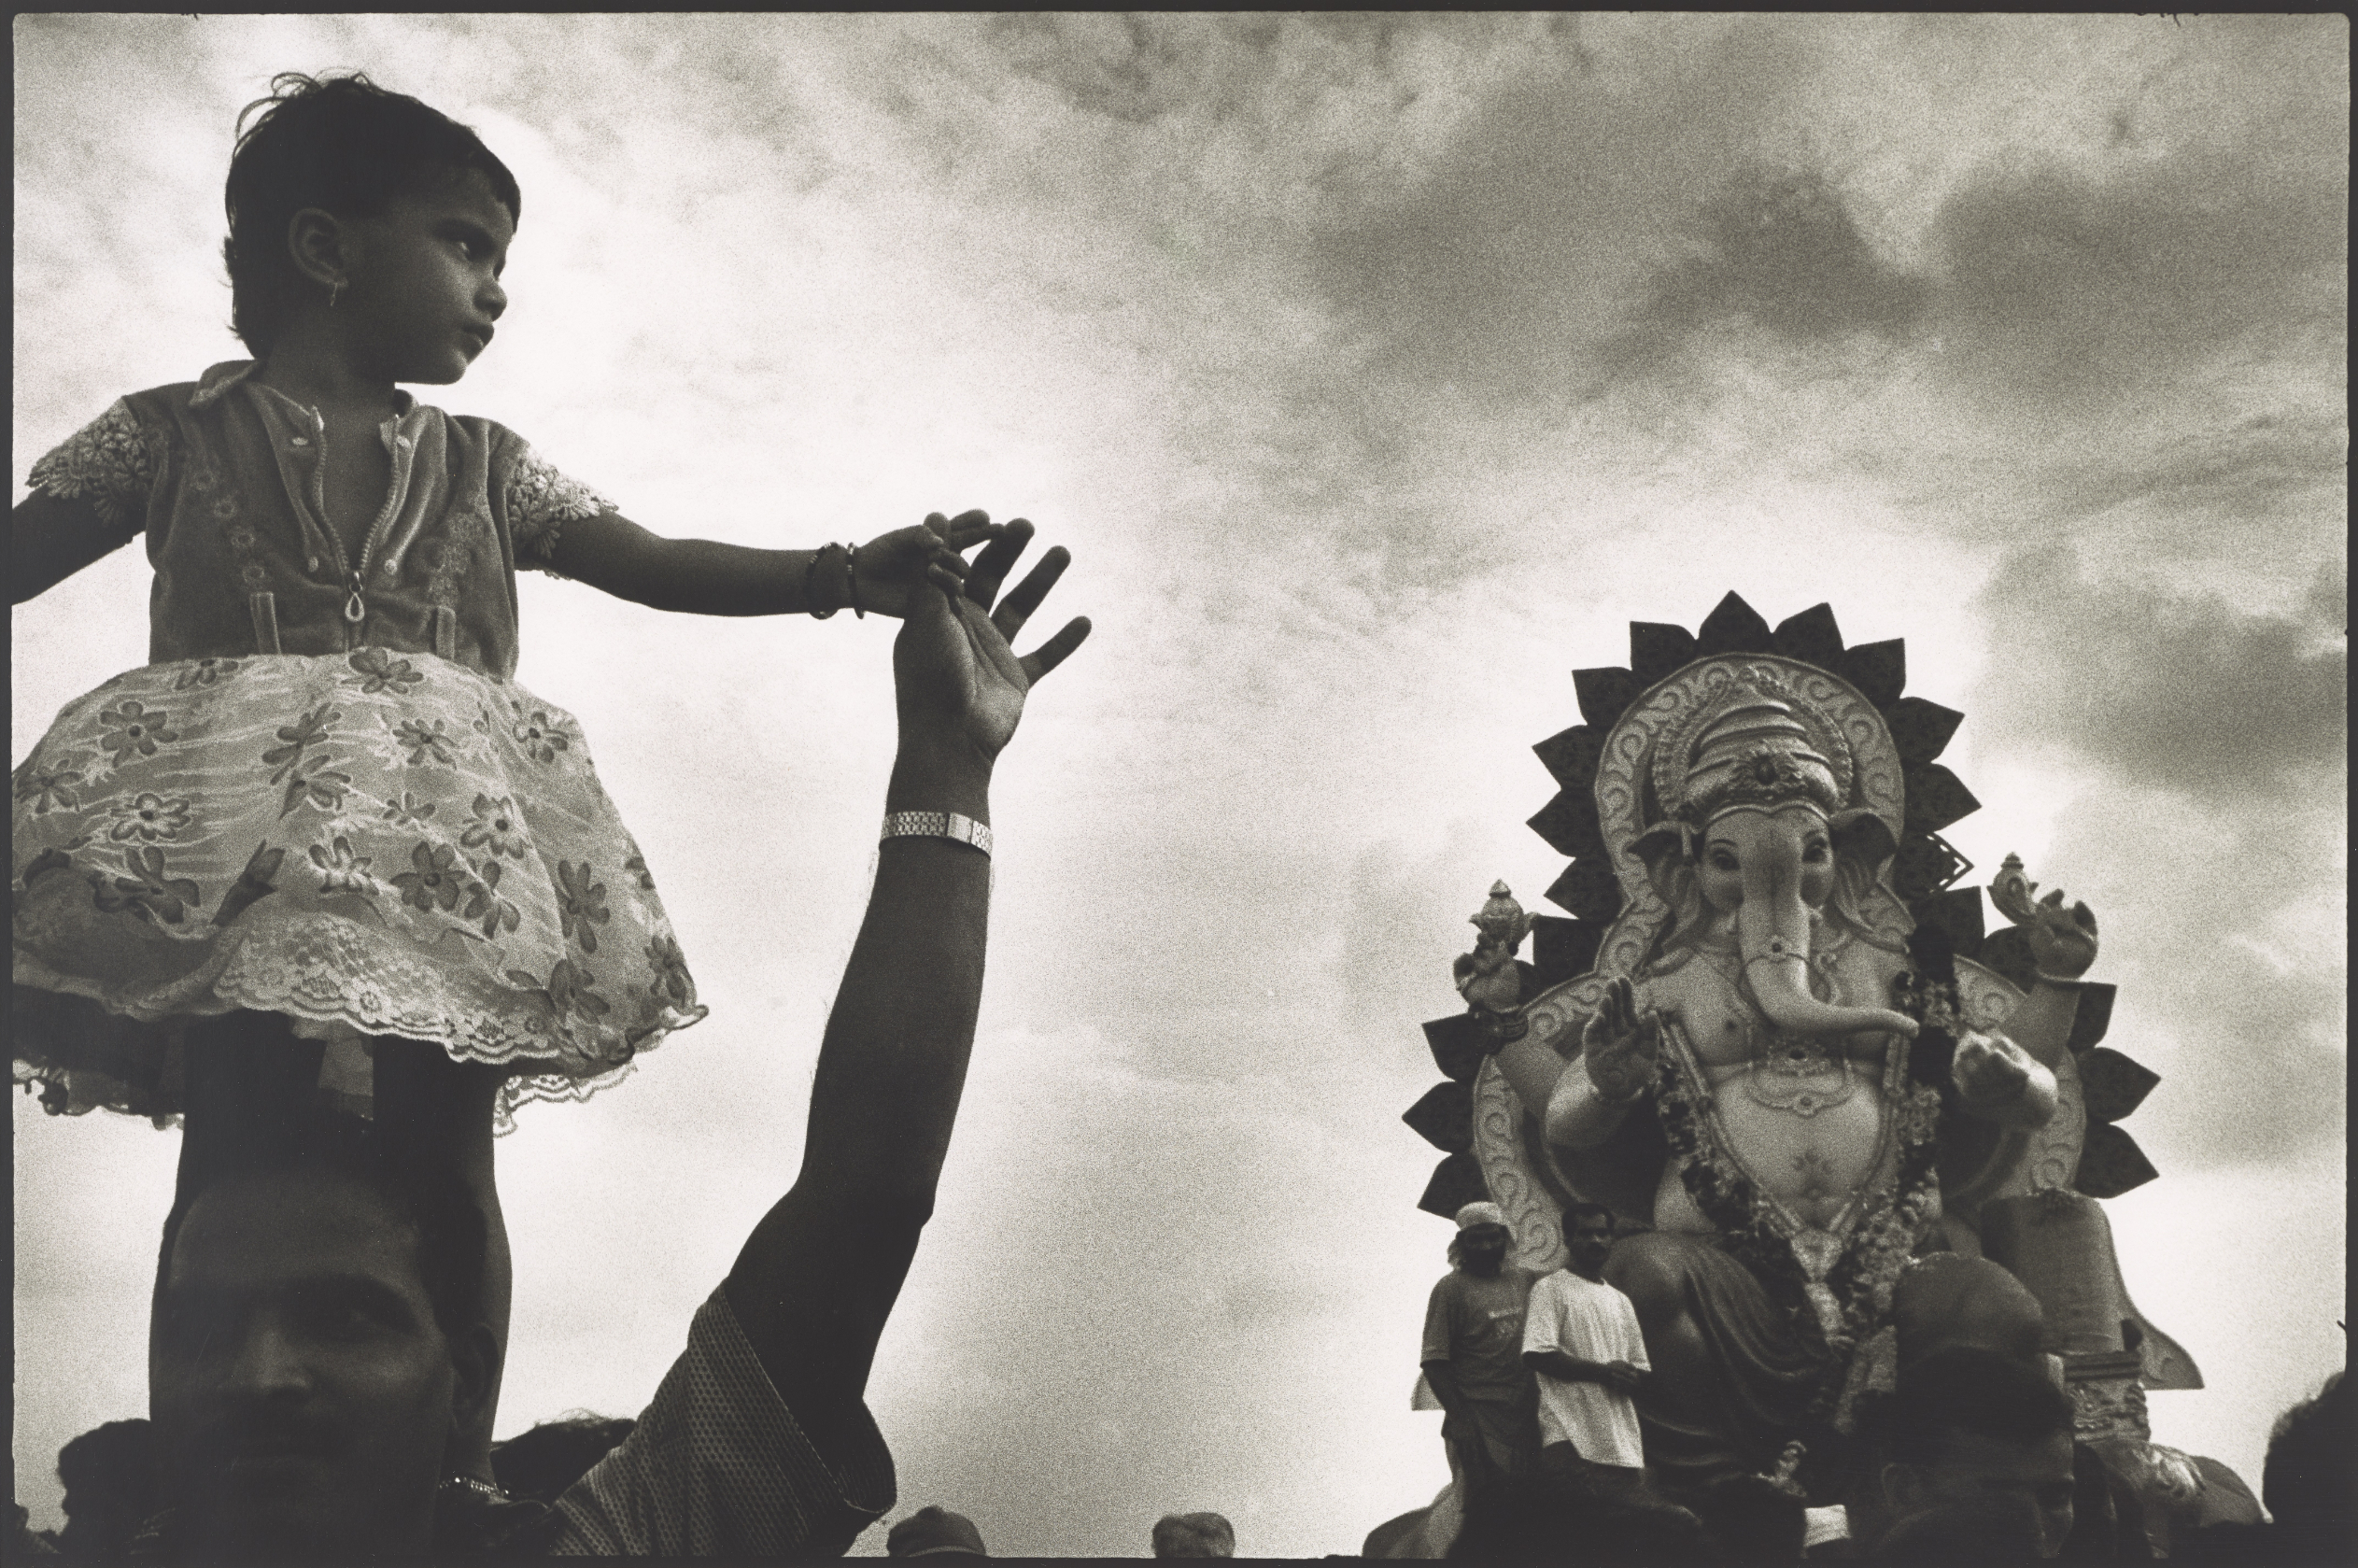 On the left in a black-and-white photograph, a young girl with short hair and a flowered dress stands on a man’s shoulders and holds his upstretched hand. She looks over her left shoulder at a large statue of the elephant-headed Hindu god Ganesh enthroned on a pedestal and adorned with garlands. The statue is at least twice as tall as the men beside it.